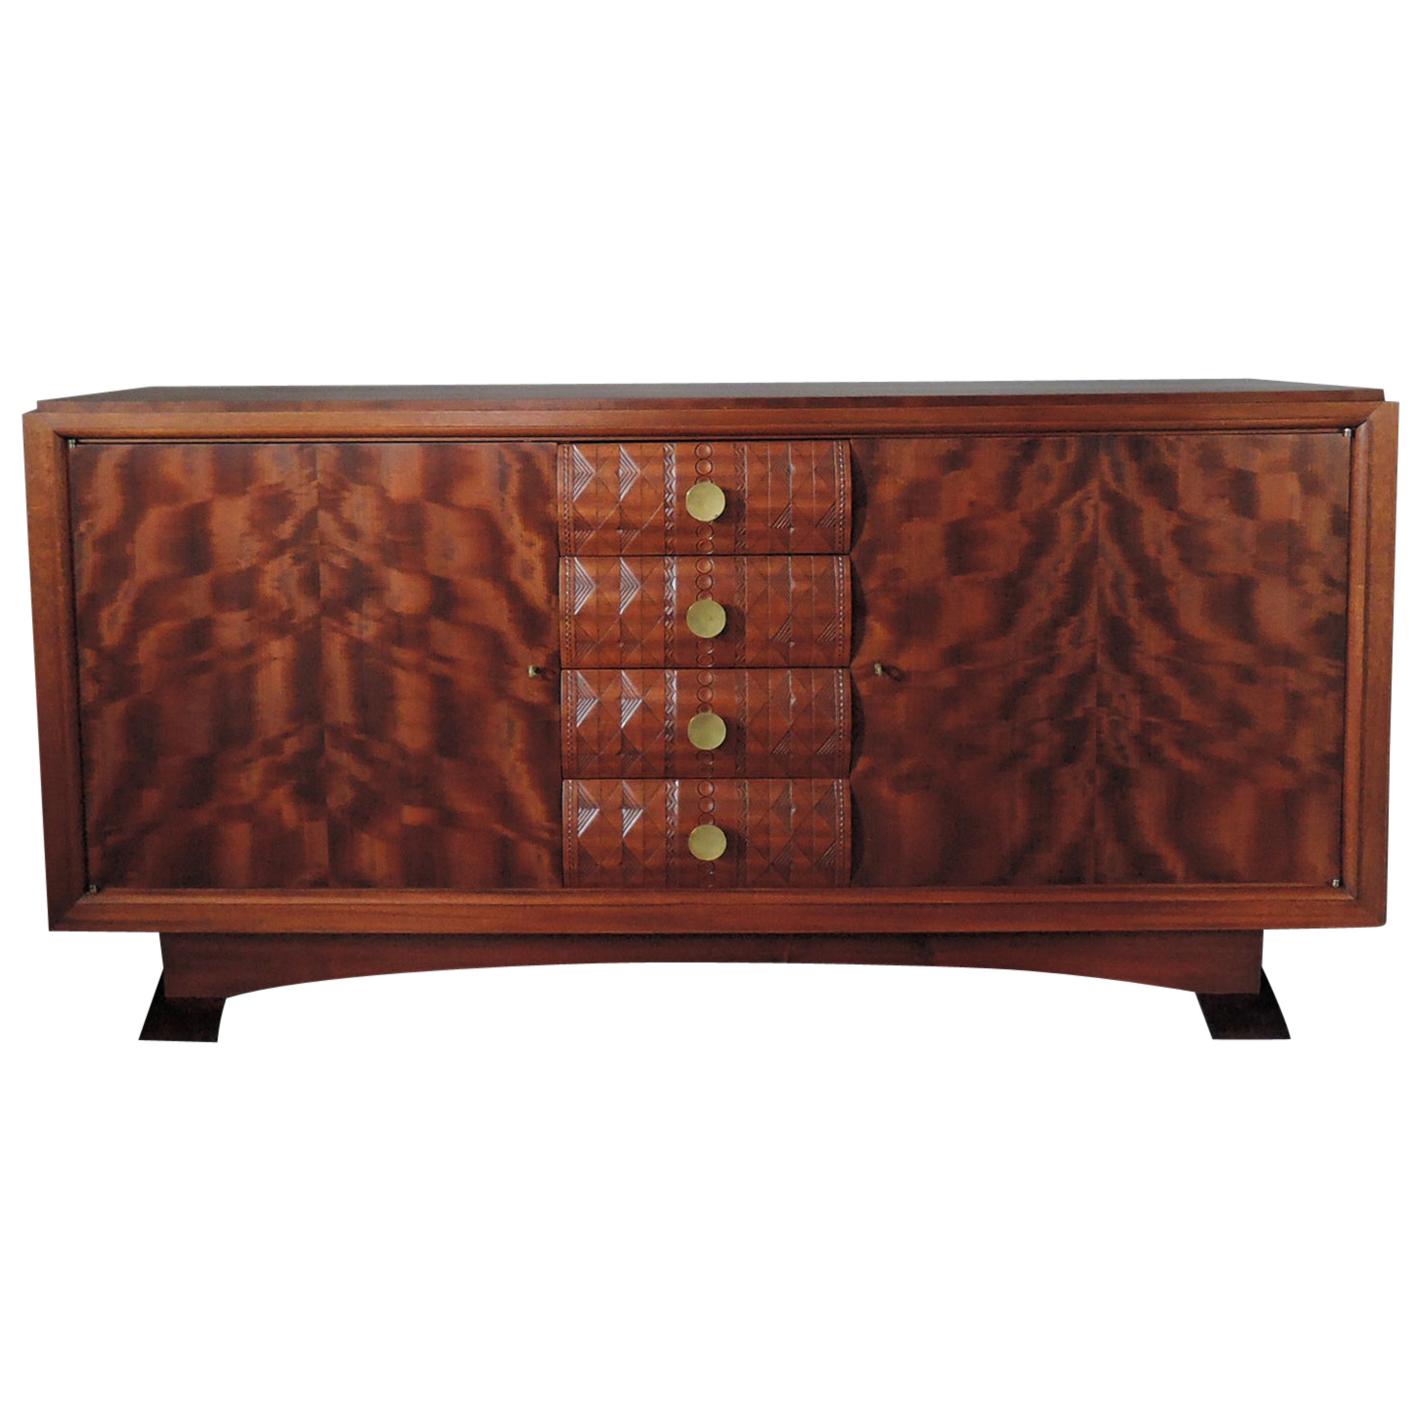 Fine French Art Deco Mahogany Sideboard by Albert Guenot for "Atelier Pomone"